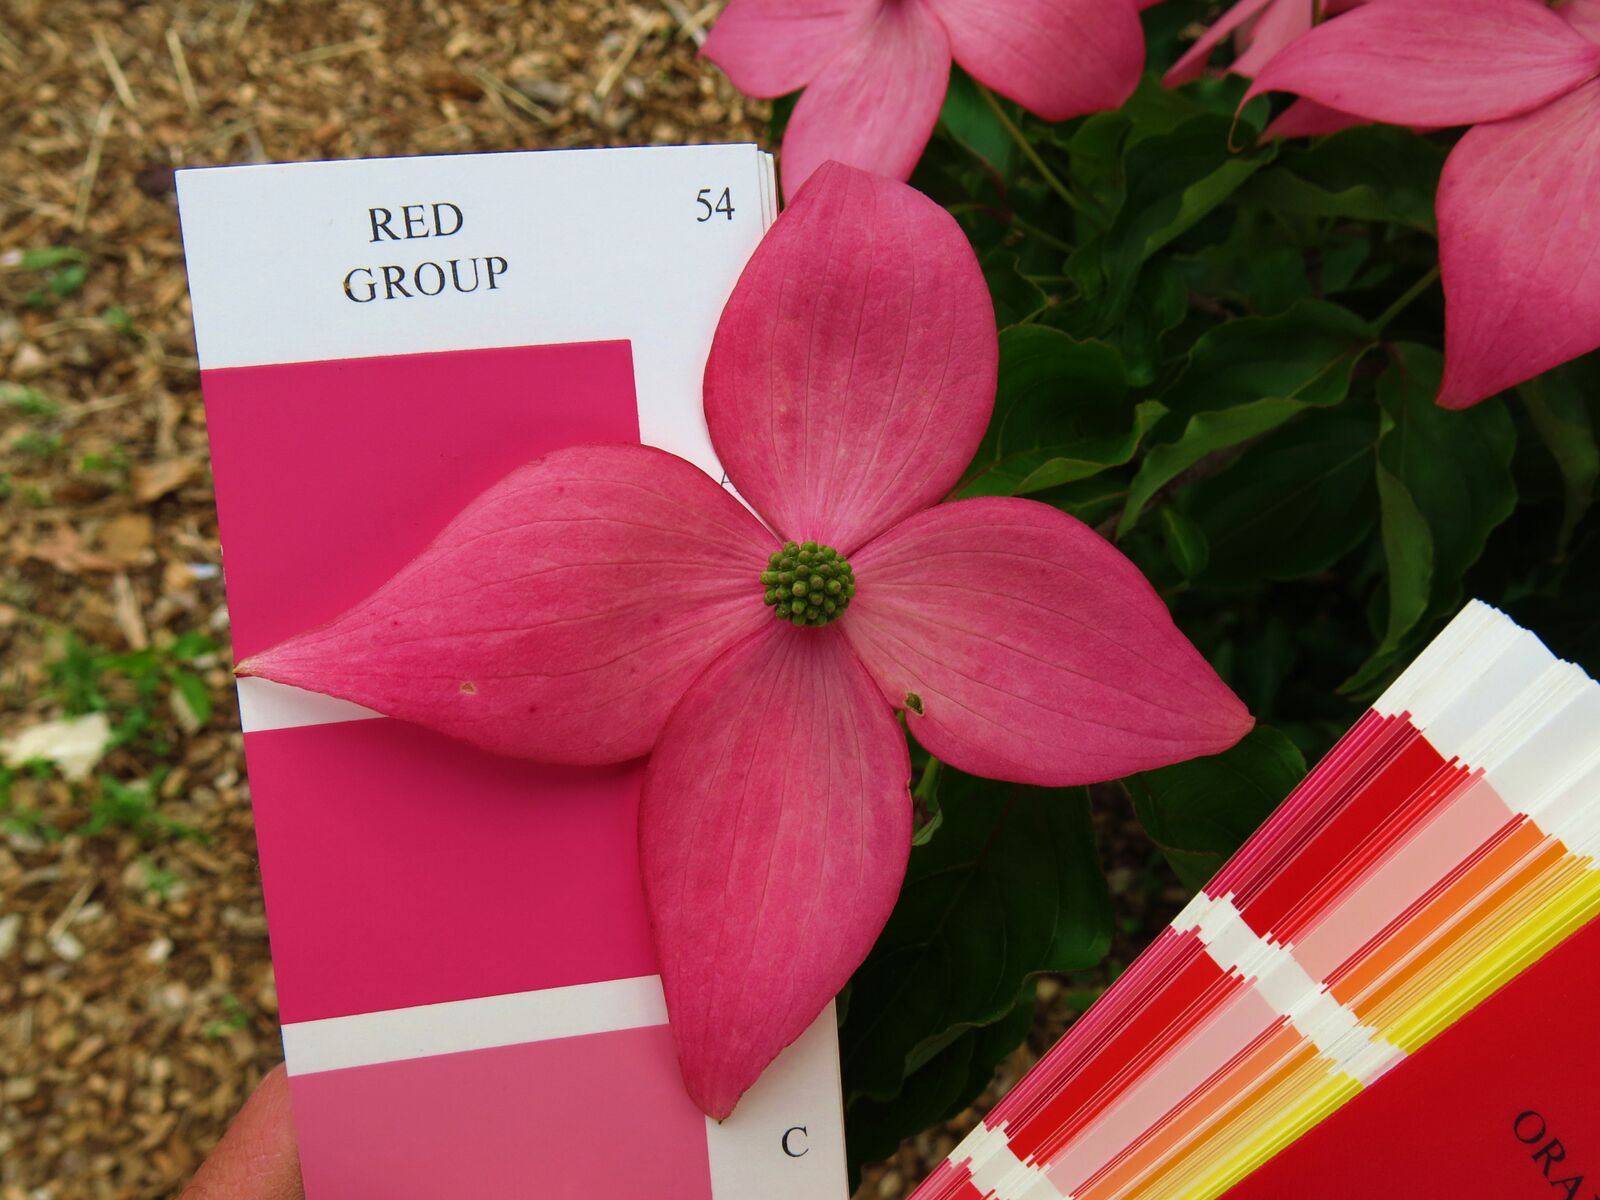 Dogwood flower next to a color swatch